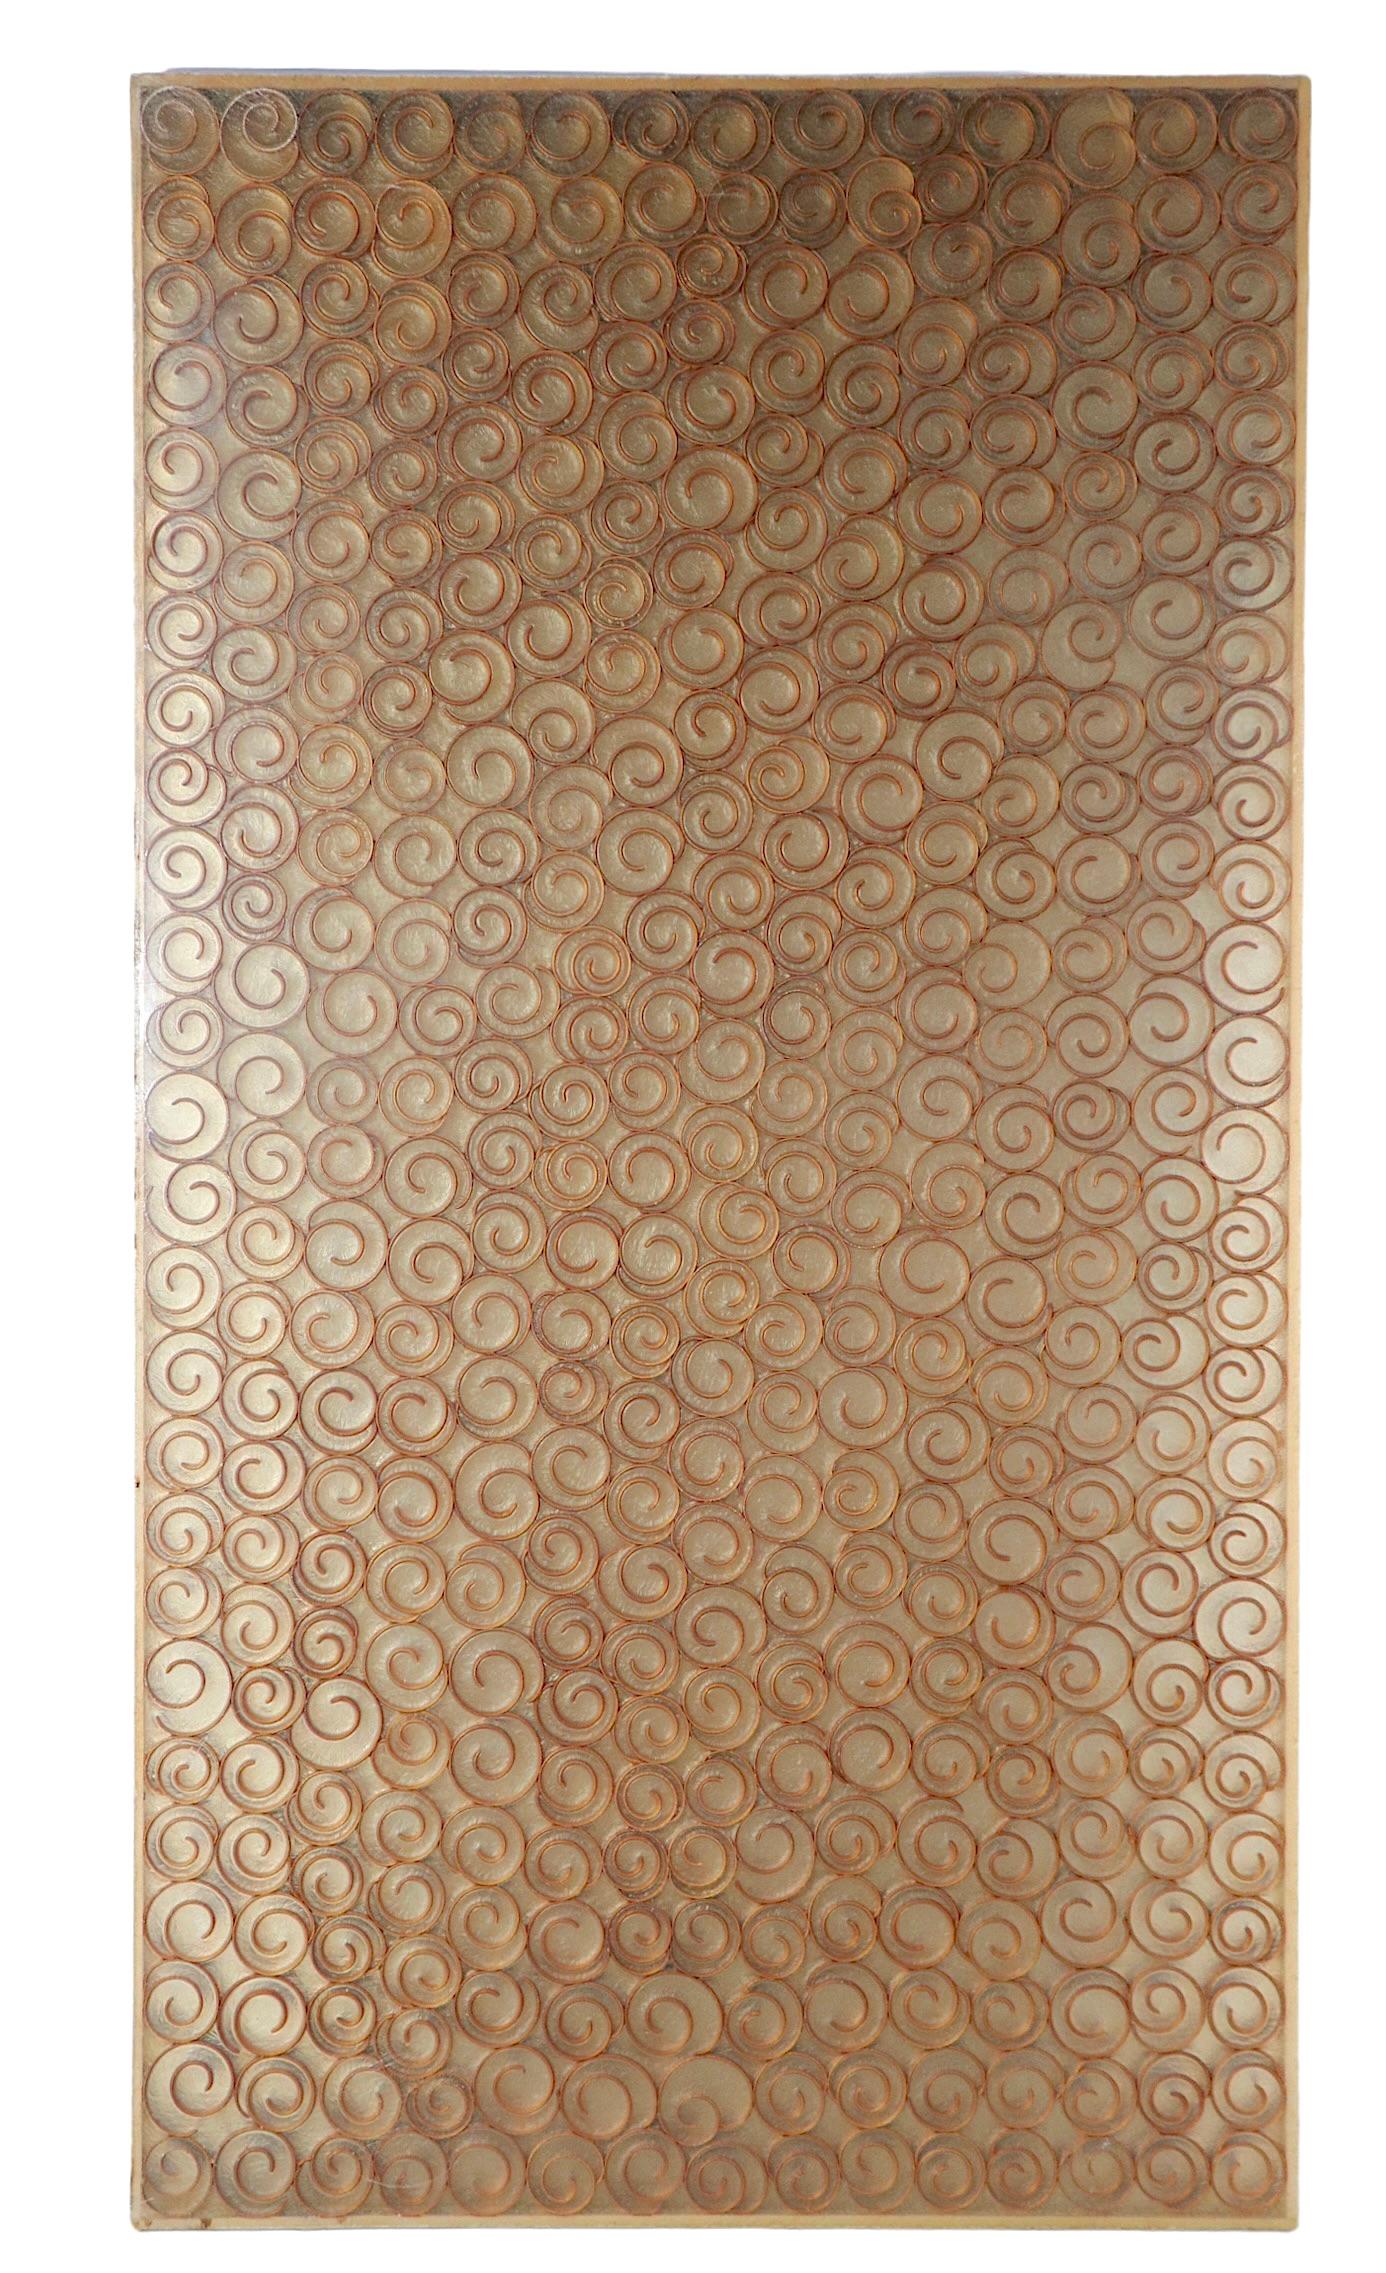 Modernist Translucent Architectural Panel with Repeating Curlicue Field Motif For Sale 2